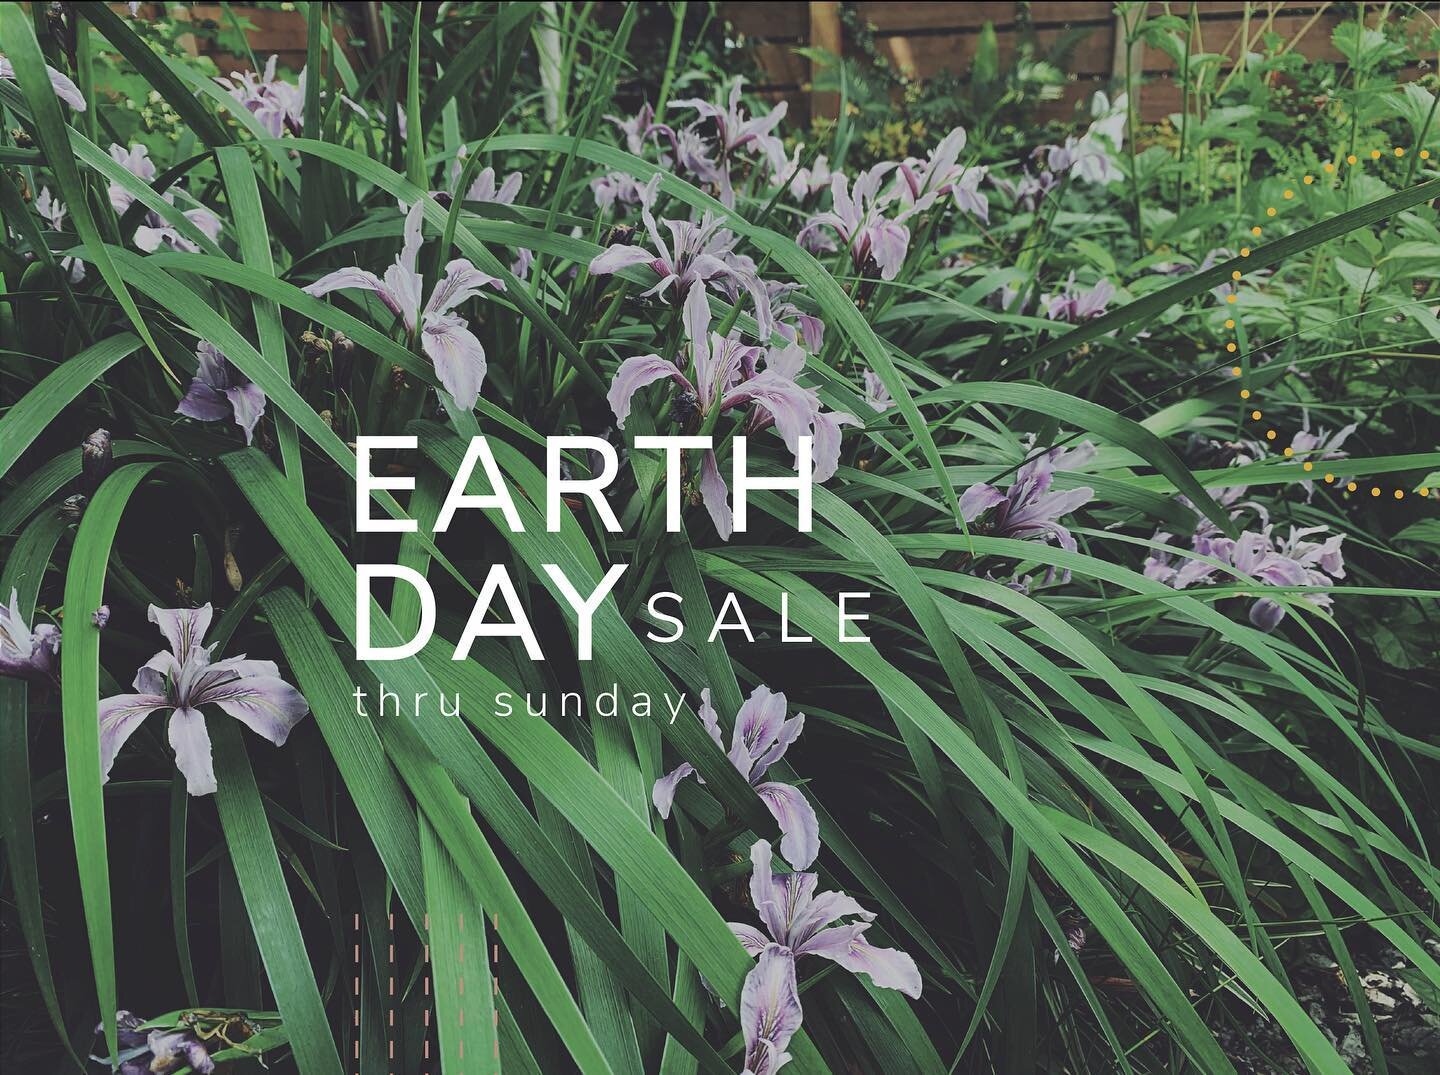 Earth Day is this Saturday and to help everyone celebrate, all our plants are 20% off thru Sunday.
code: earthday2023

We won&rsquo;t be doing any pop-ups this weekend, as we&rsquo;ll be out playing in the dirt, planting all sorts of plant babes into